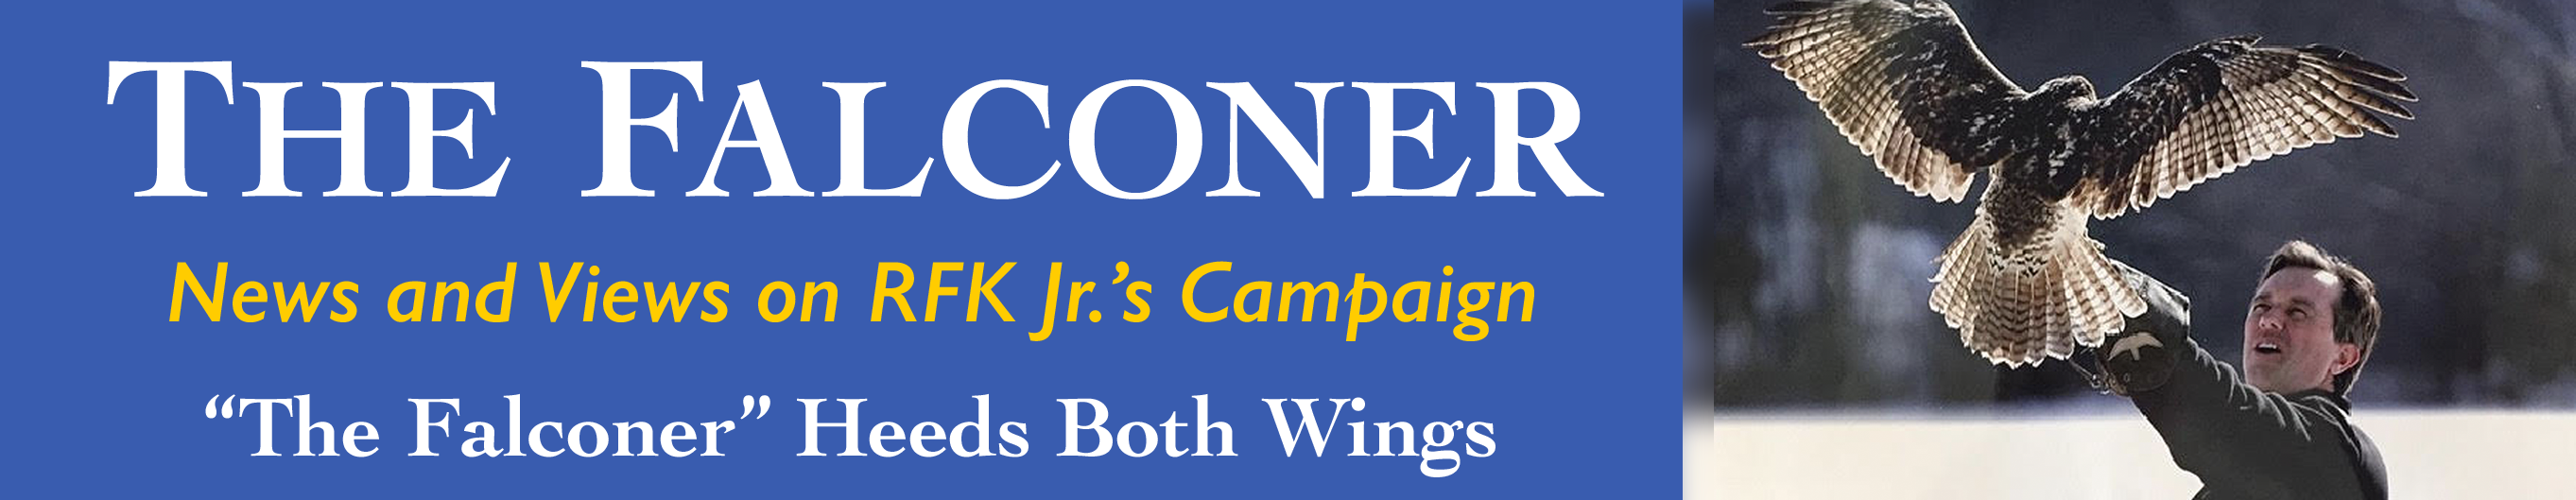 The Falconer, News and Views on RFK Jr's Campaign, "The Falconer" Heeds Both Wings